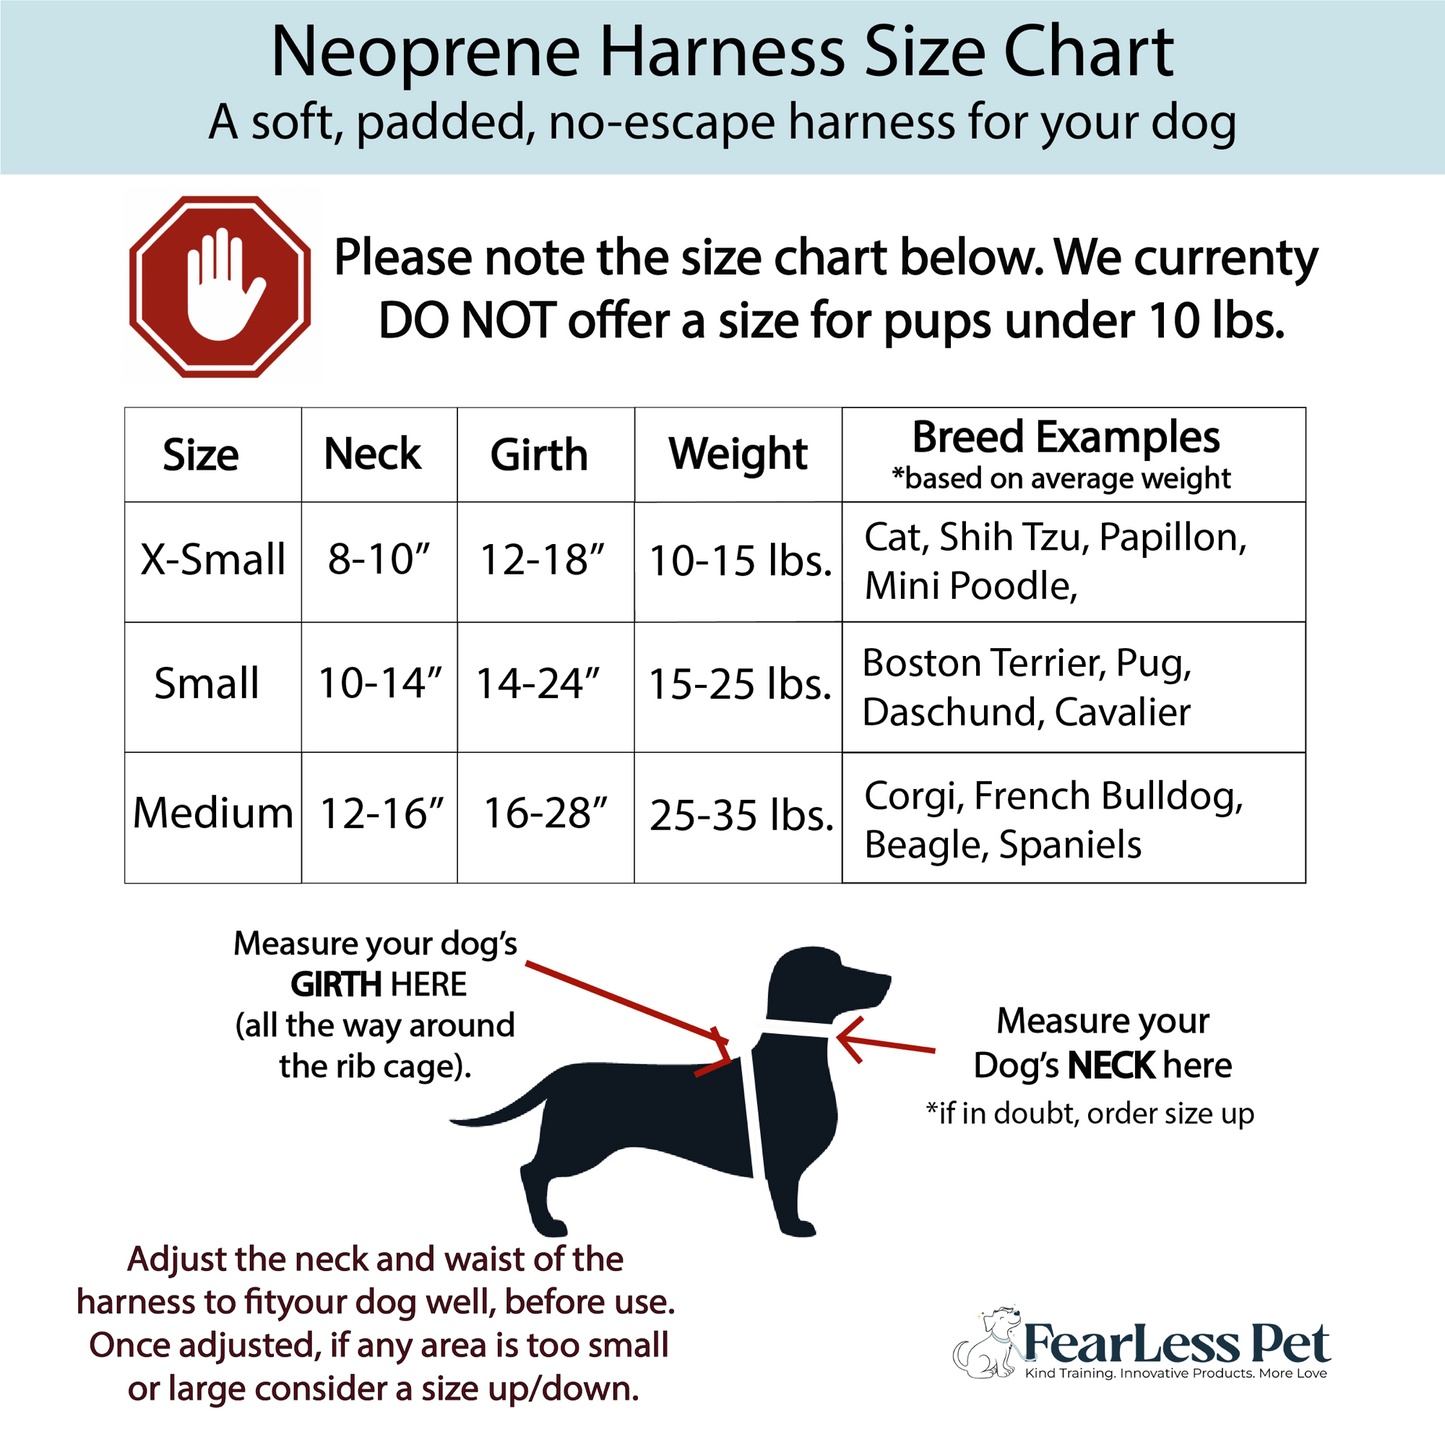 a size chart for fearless pet harnesses in sizes extra small, small and medium harness to fit large cats, Boston terrier harness, French harness